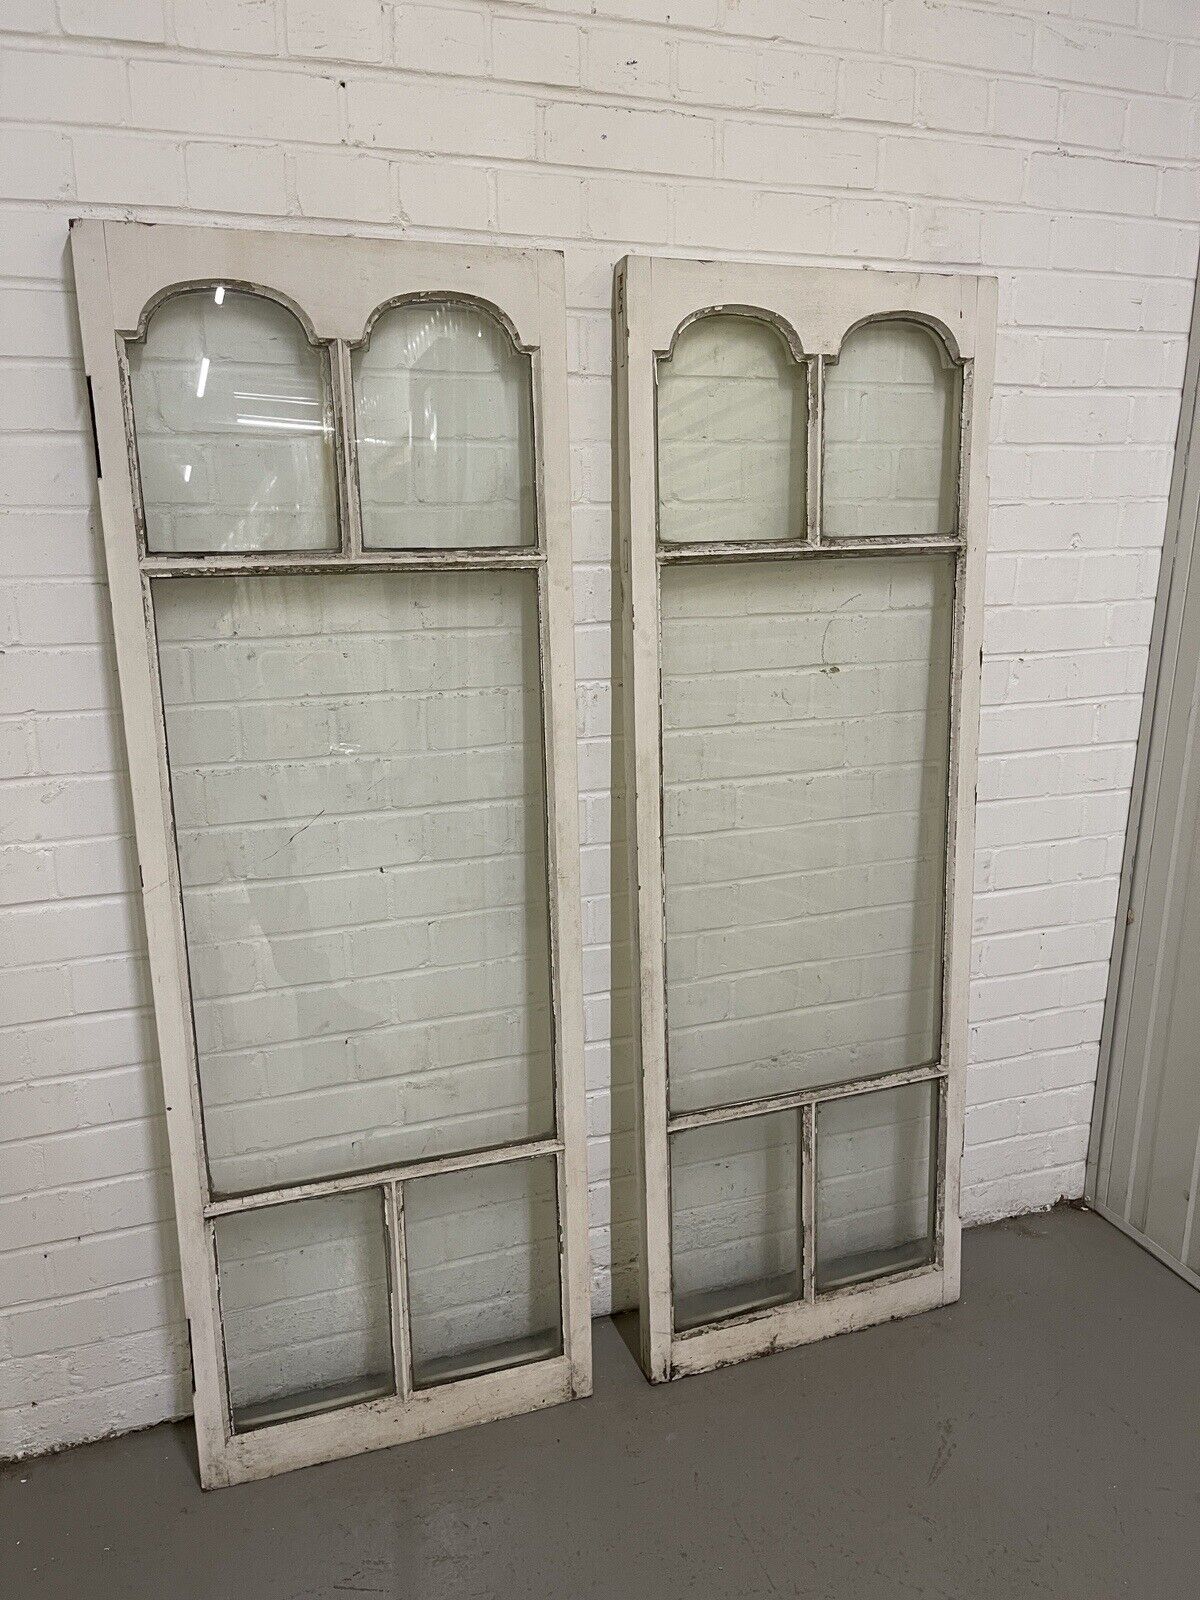 Pair Of Reclaimed Edwardian French Wooden Panel Windows 1512 x 532 1512 x 532mm